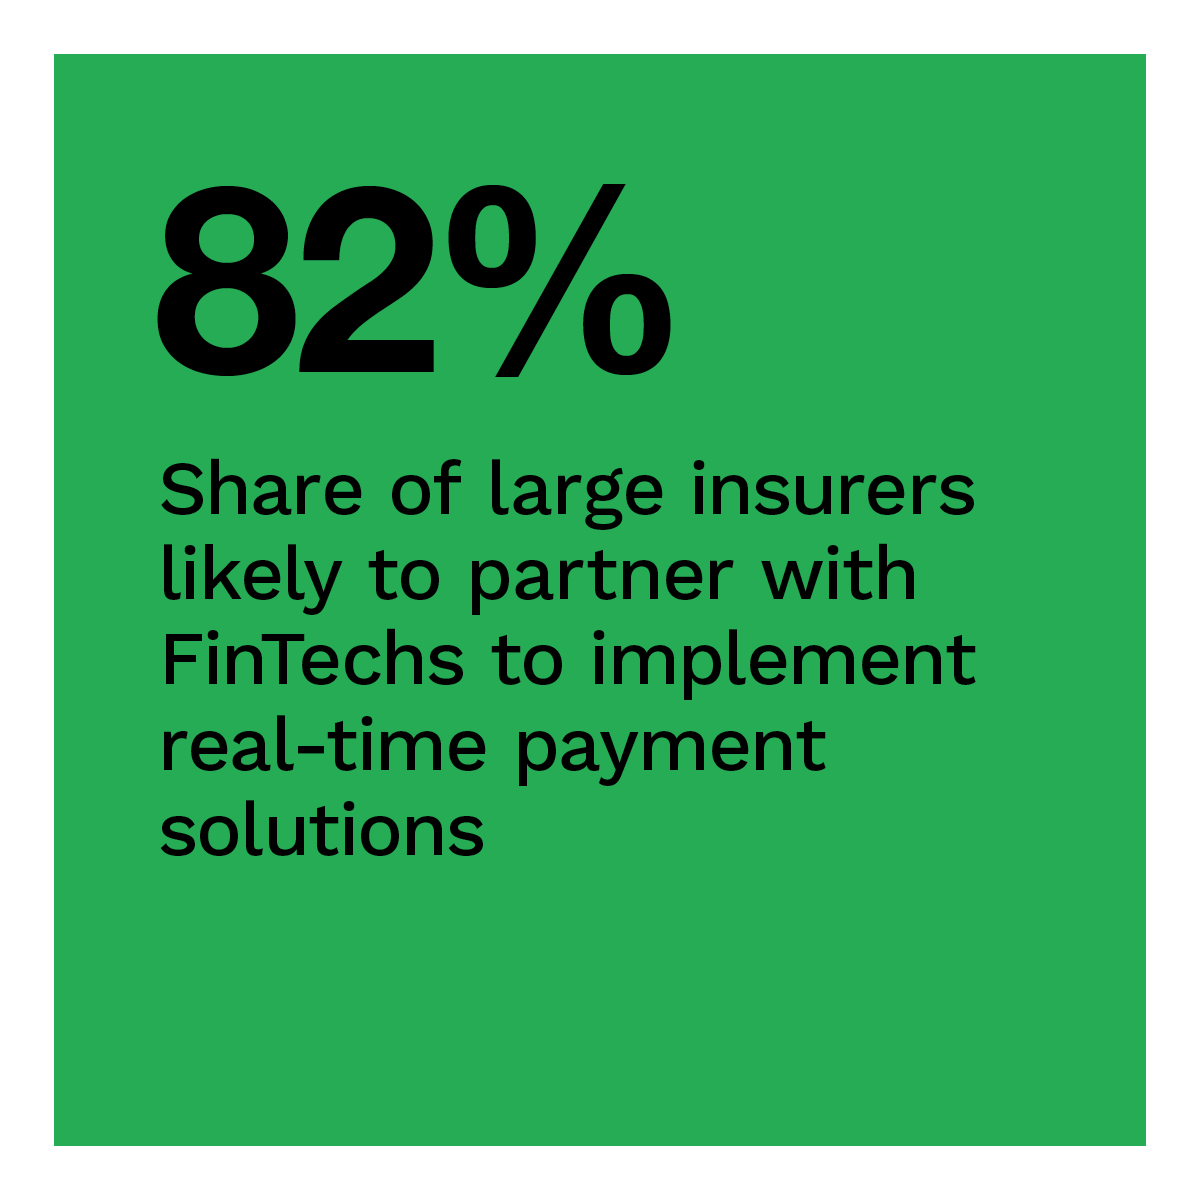 82%: Share of large insurers likely to partner with FinTechs to implement real-time payment solutions